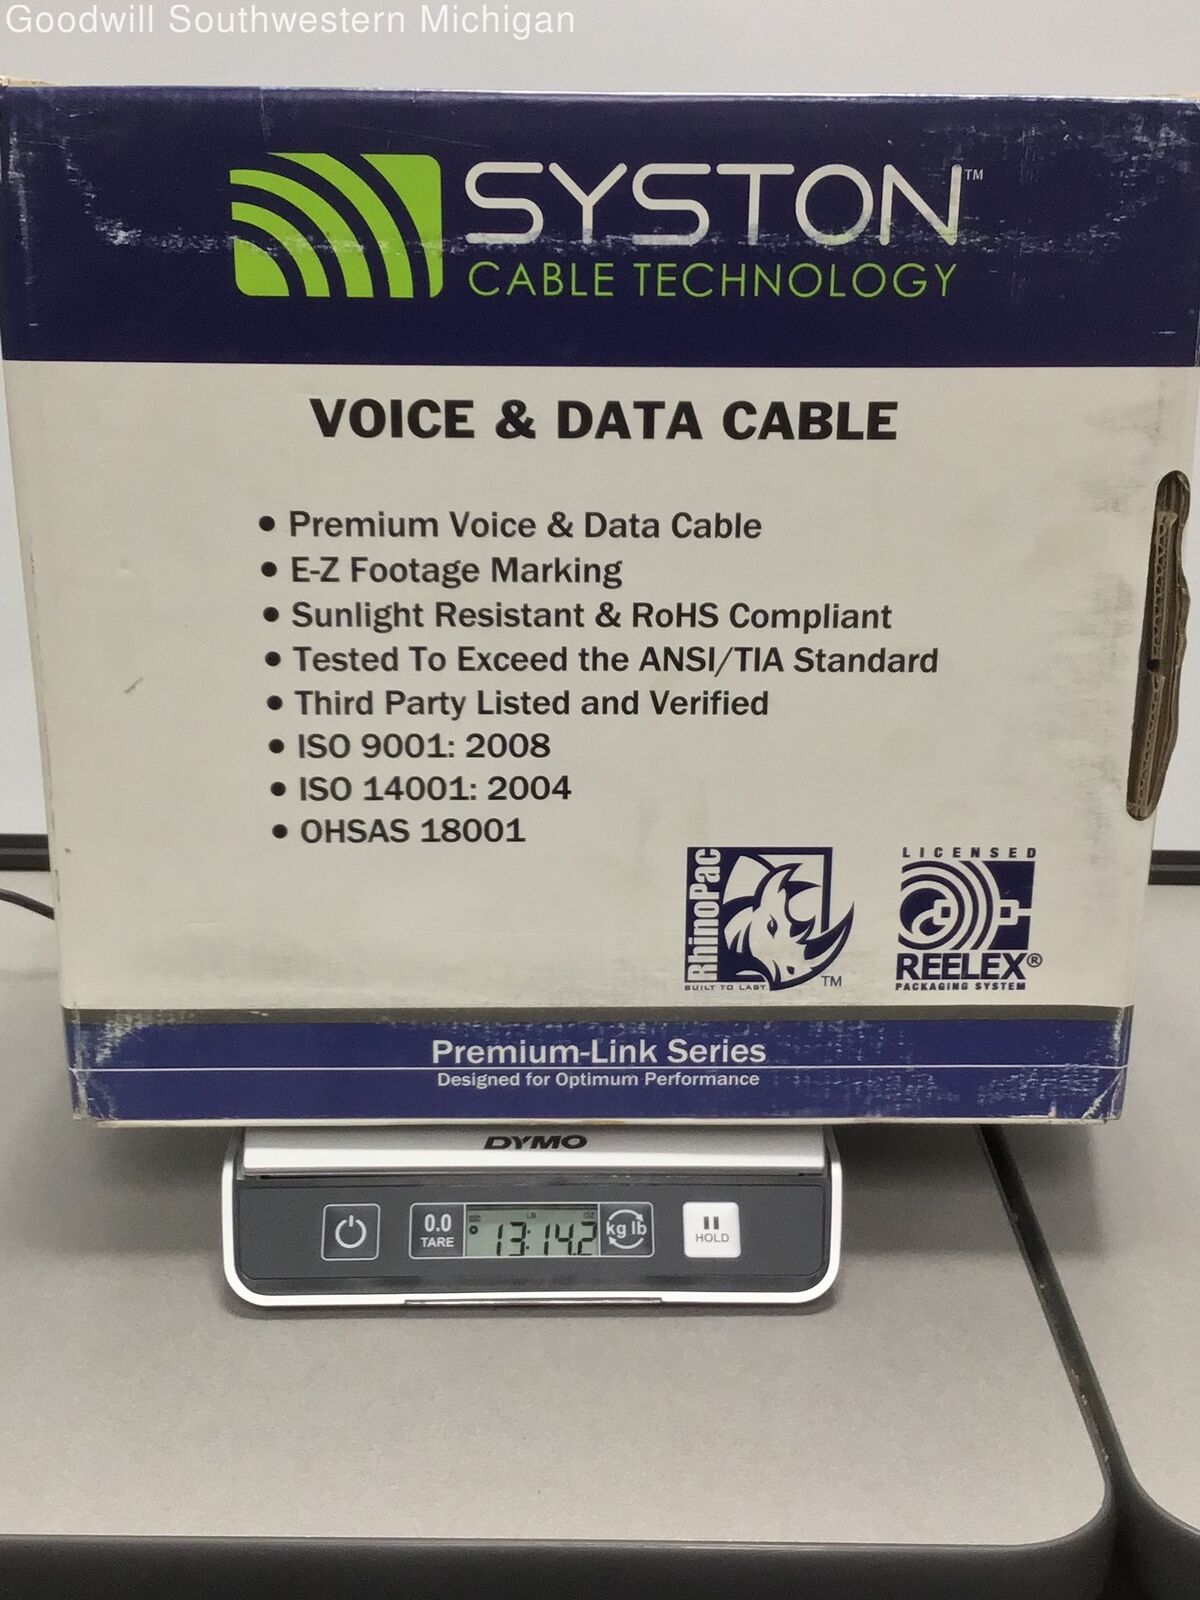 Syston Cable Technology Cat 5e Voice and Data Cable